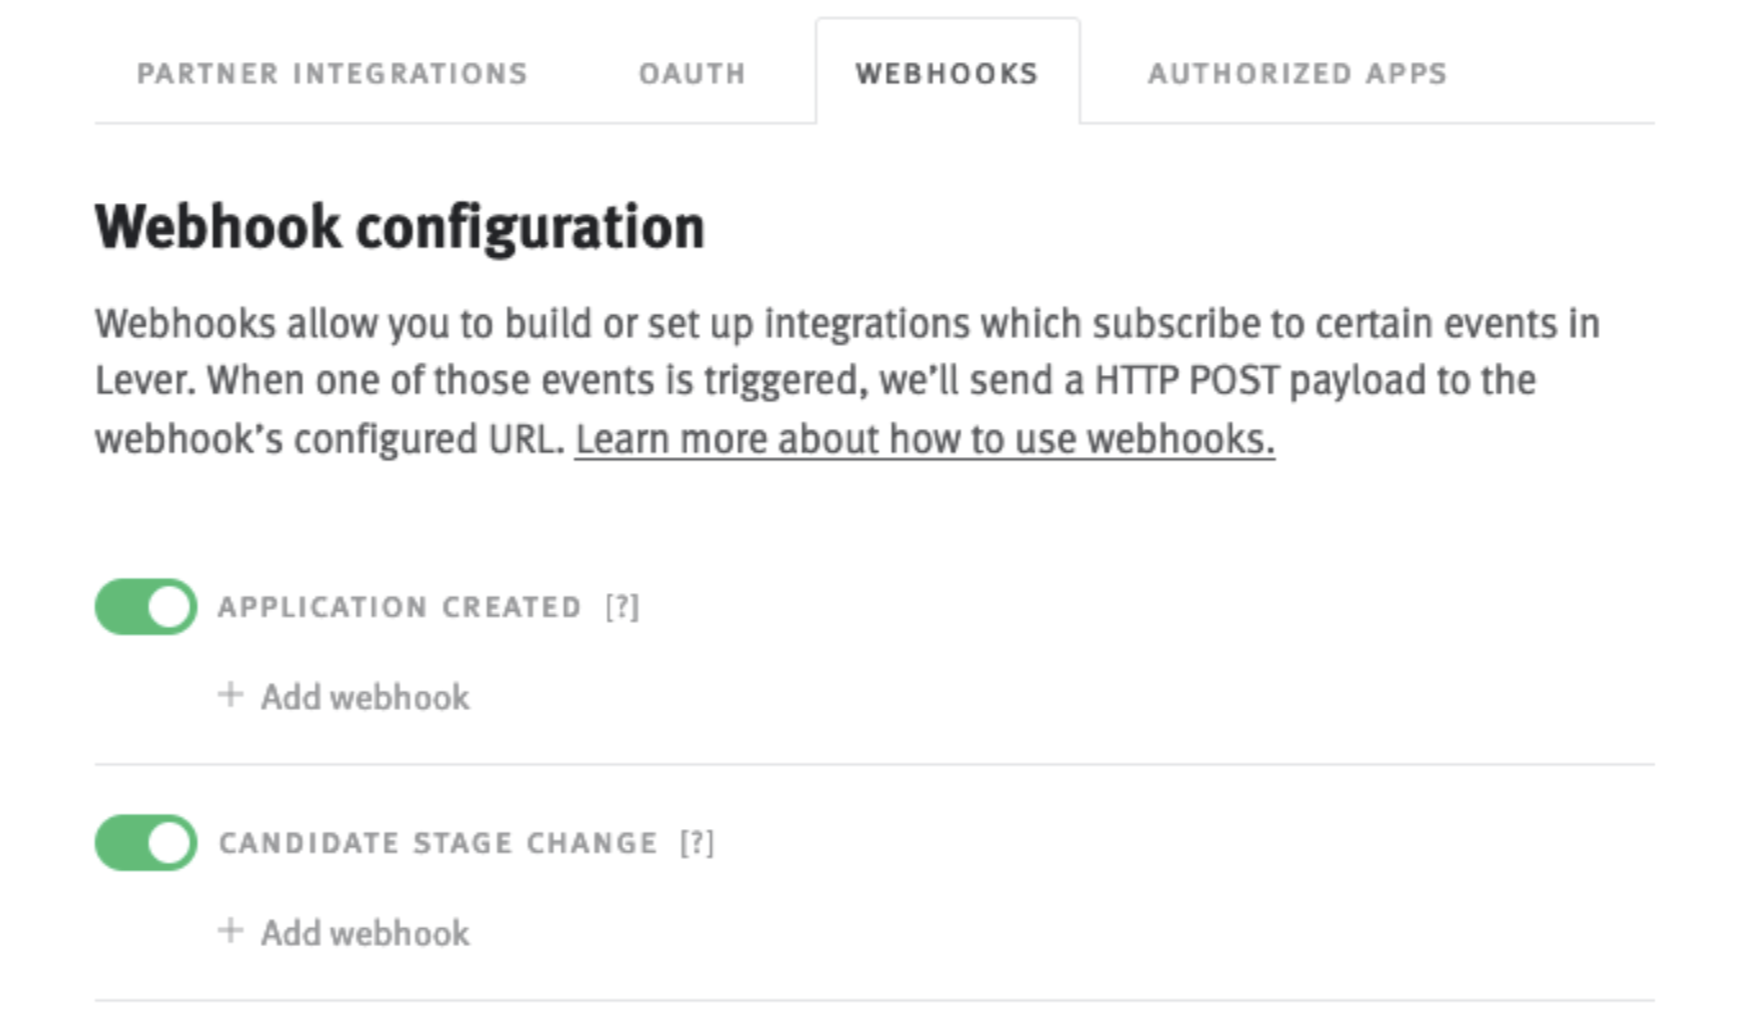 Lever webhook configuration tab with application created and candidate stage change toggles on